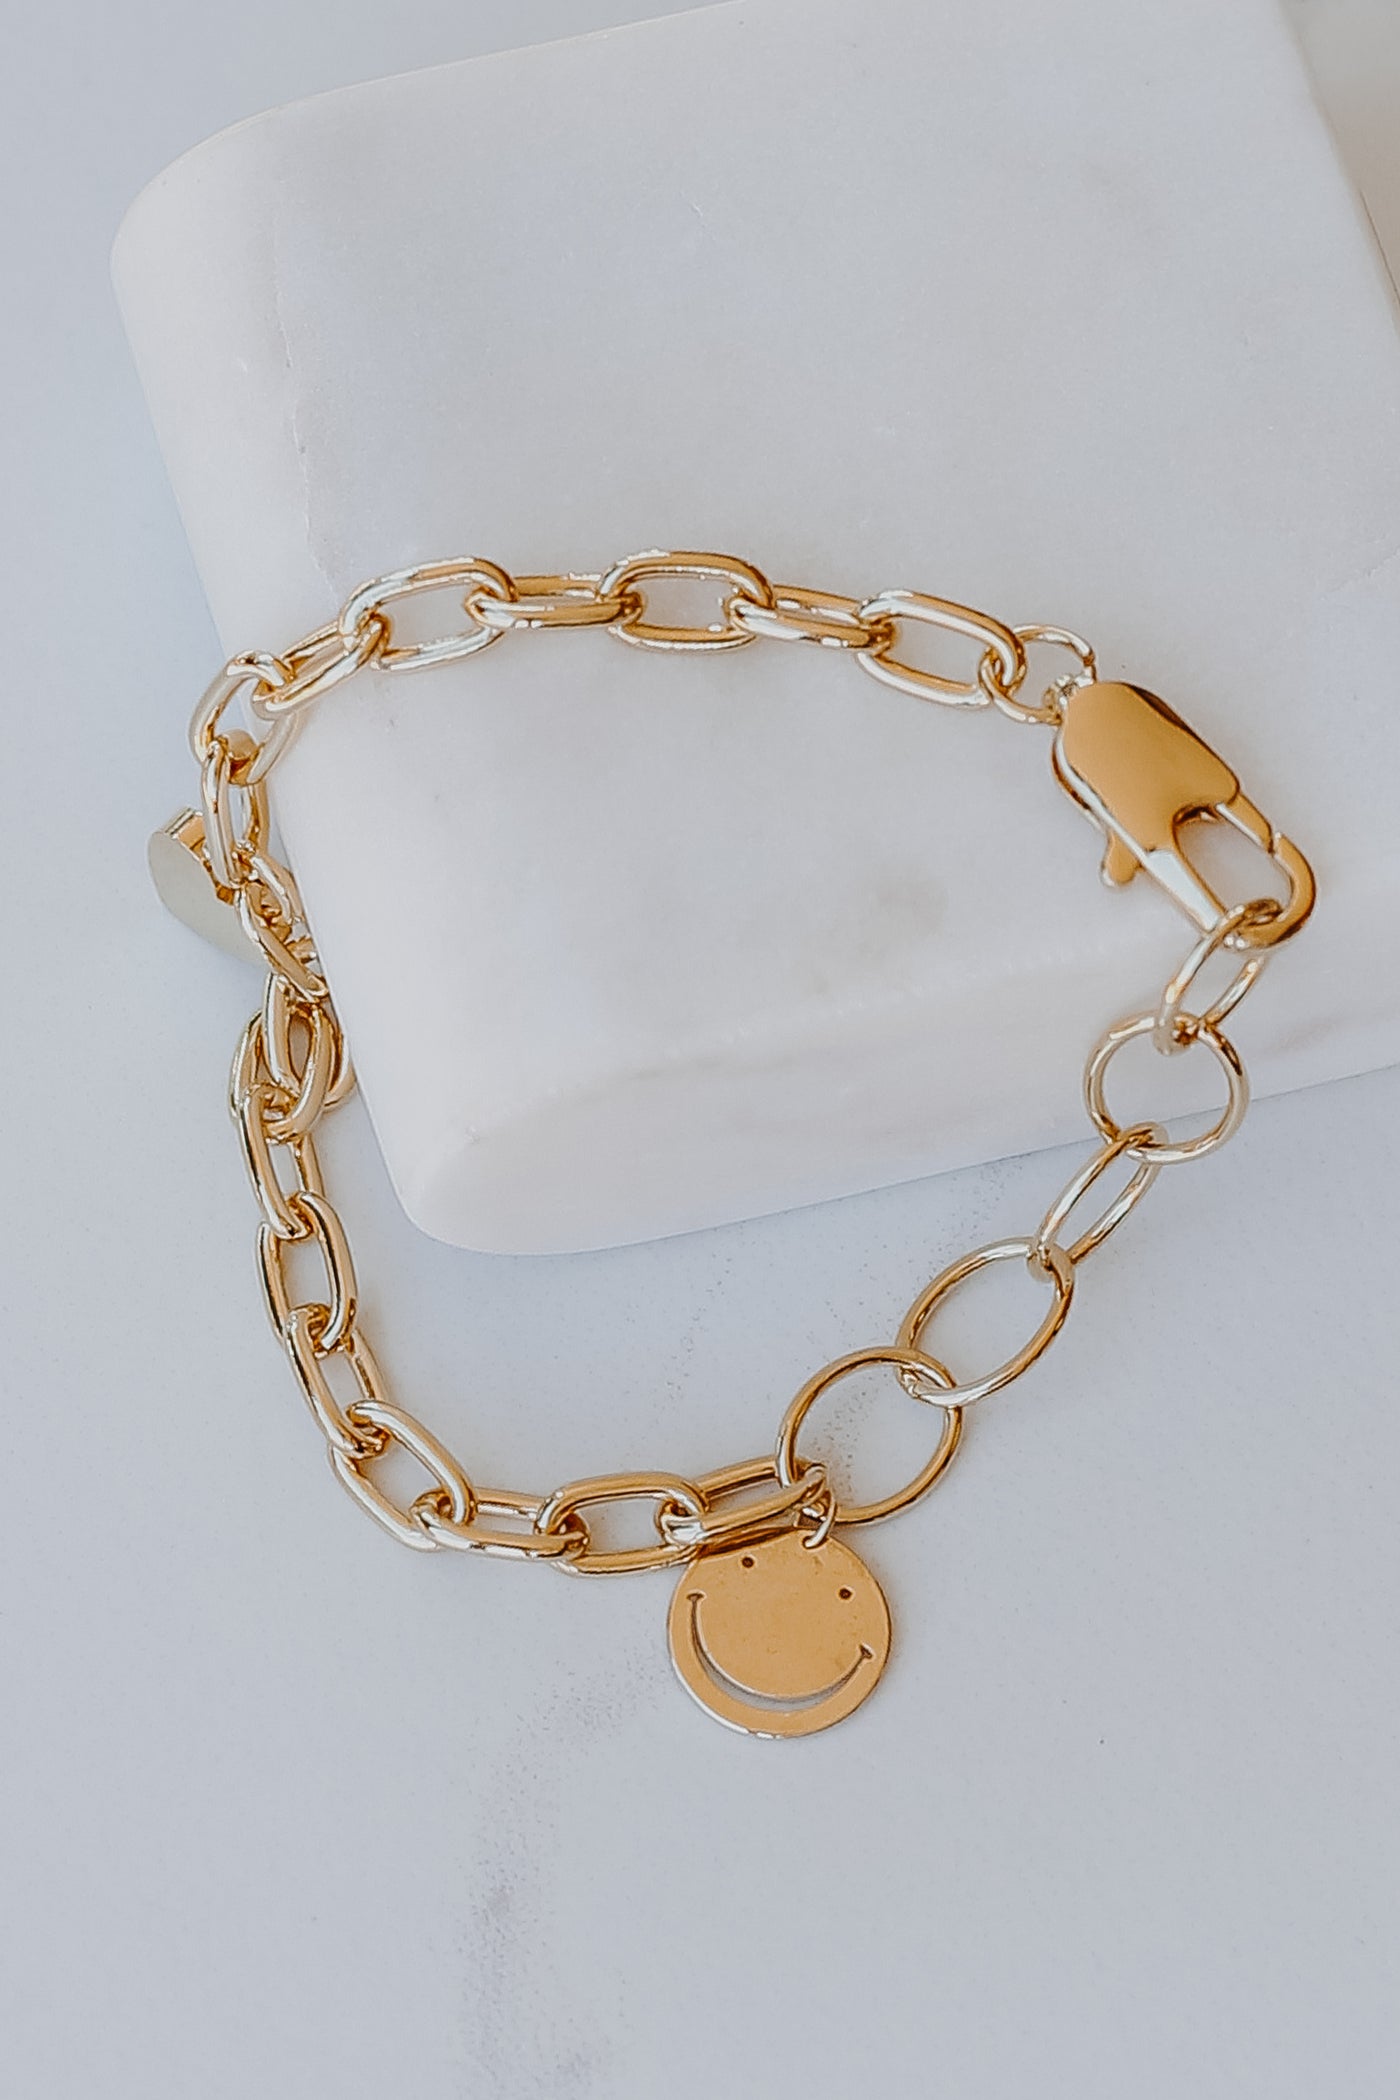 close up of a Gold Smiley Face + Heart Charm Bracelet